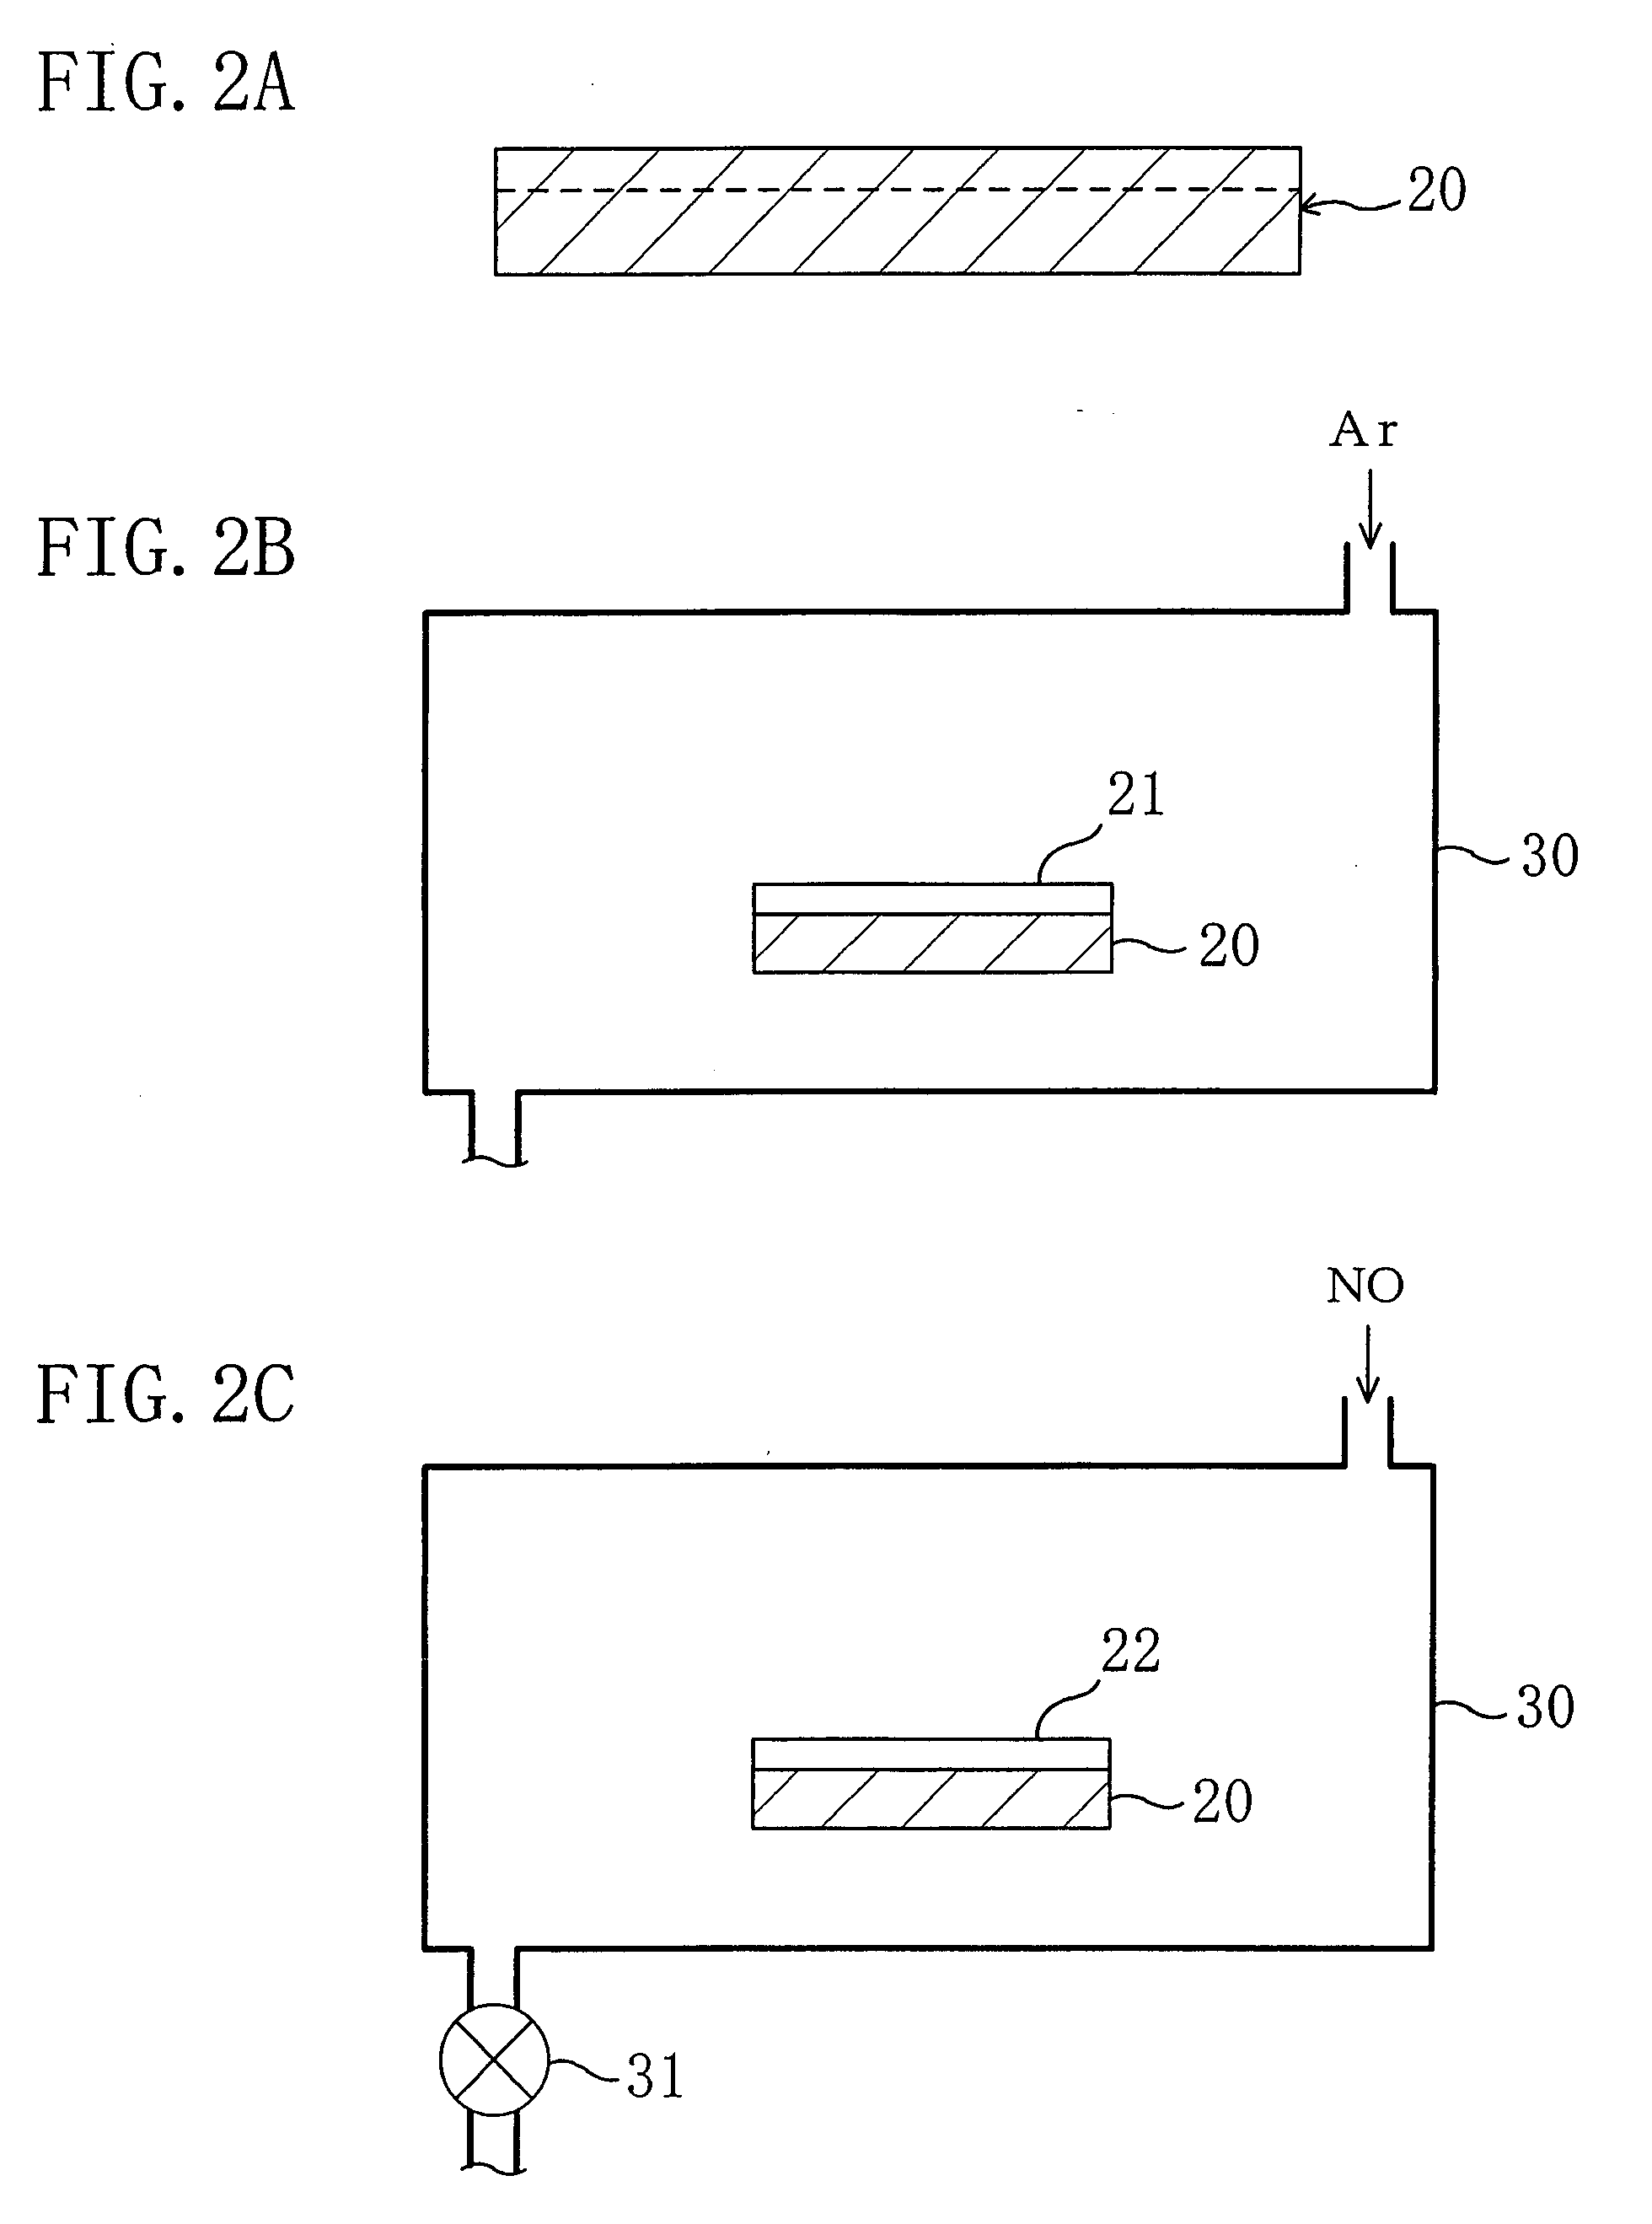 High-breakdown-voltage insulated gate semiconductor device